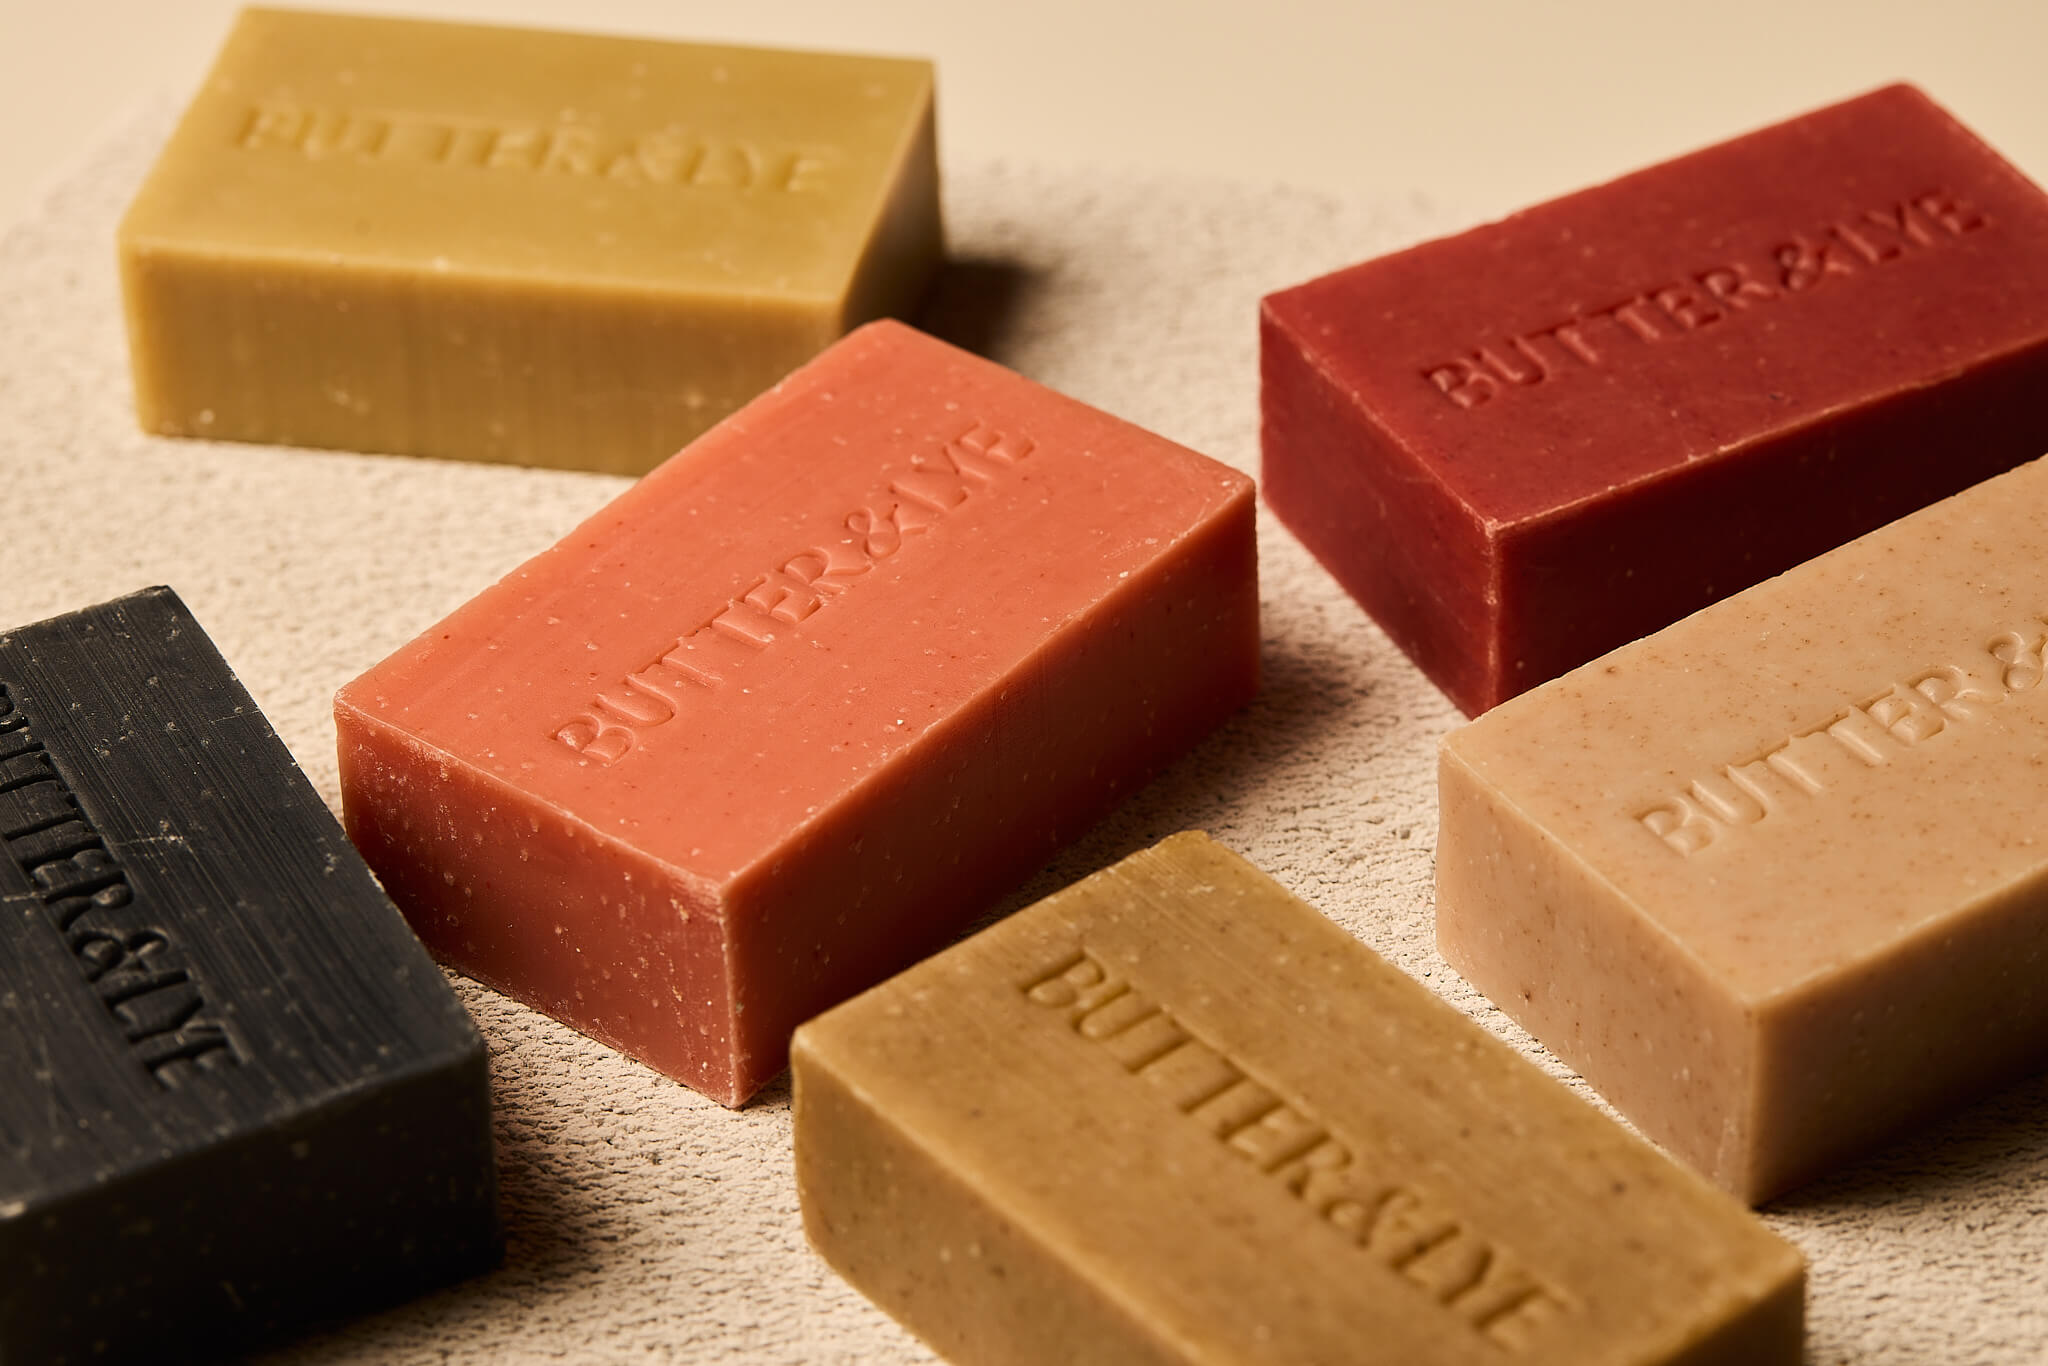 Discover The Best Natural Soap For Your Skin Type or Concern